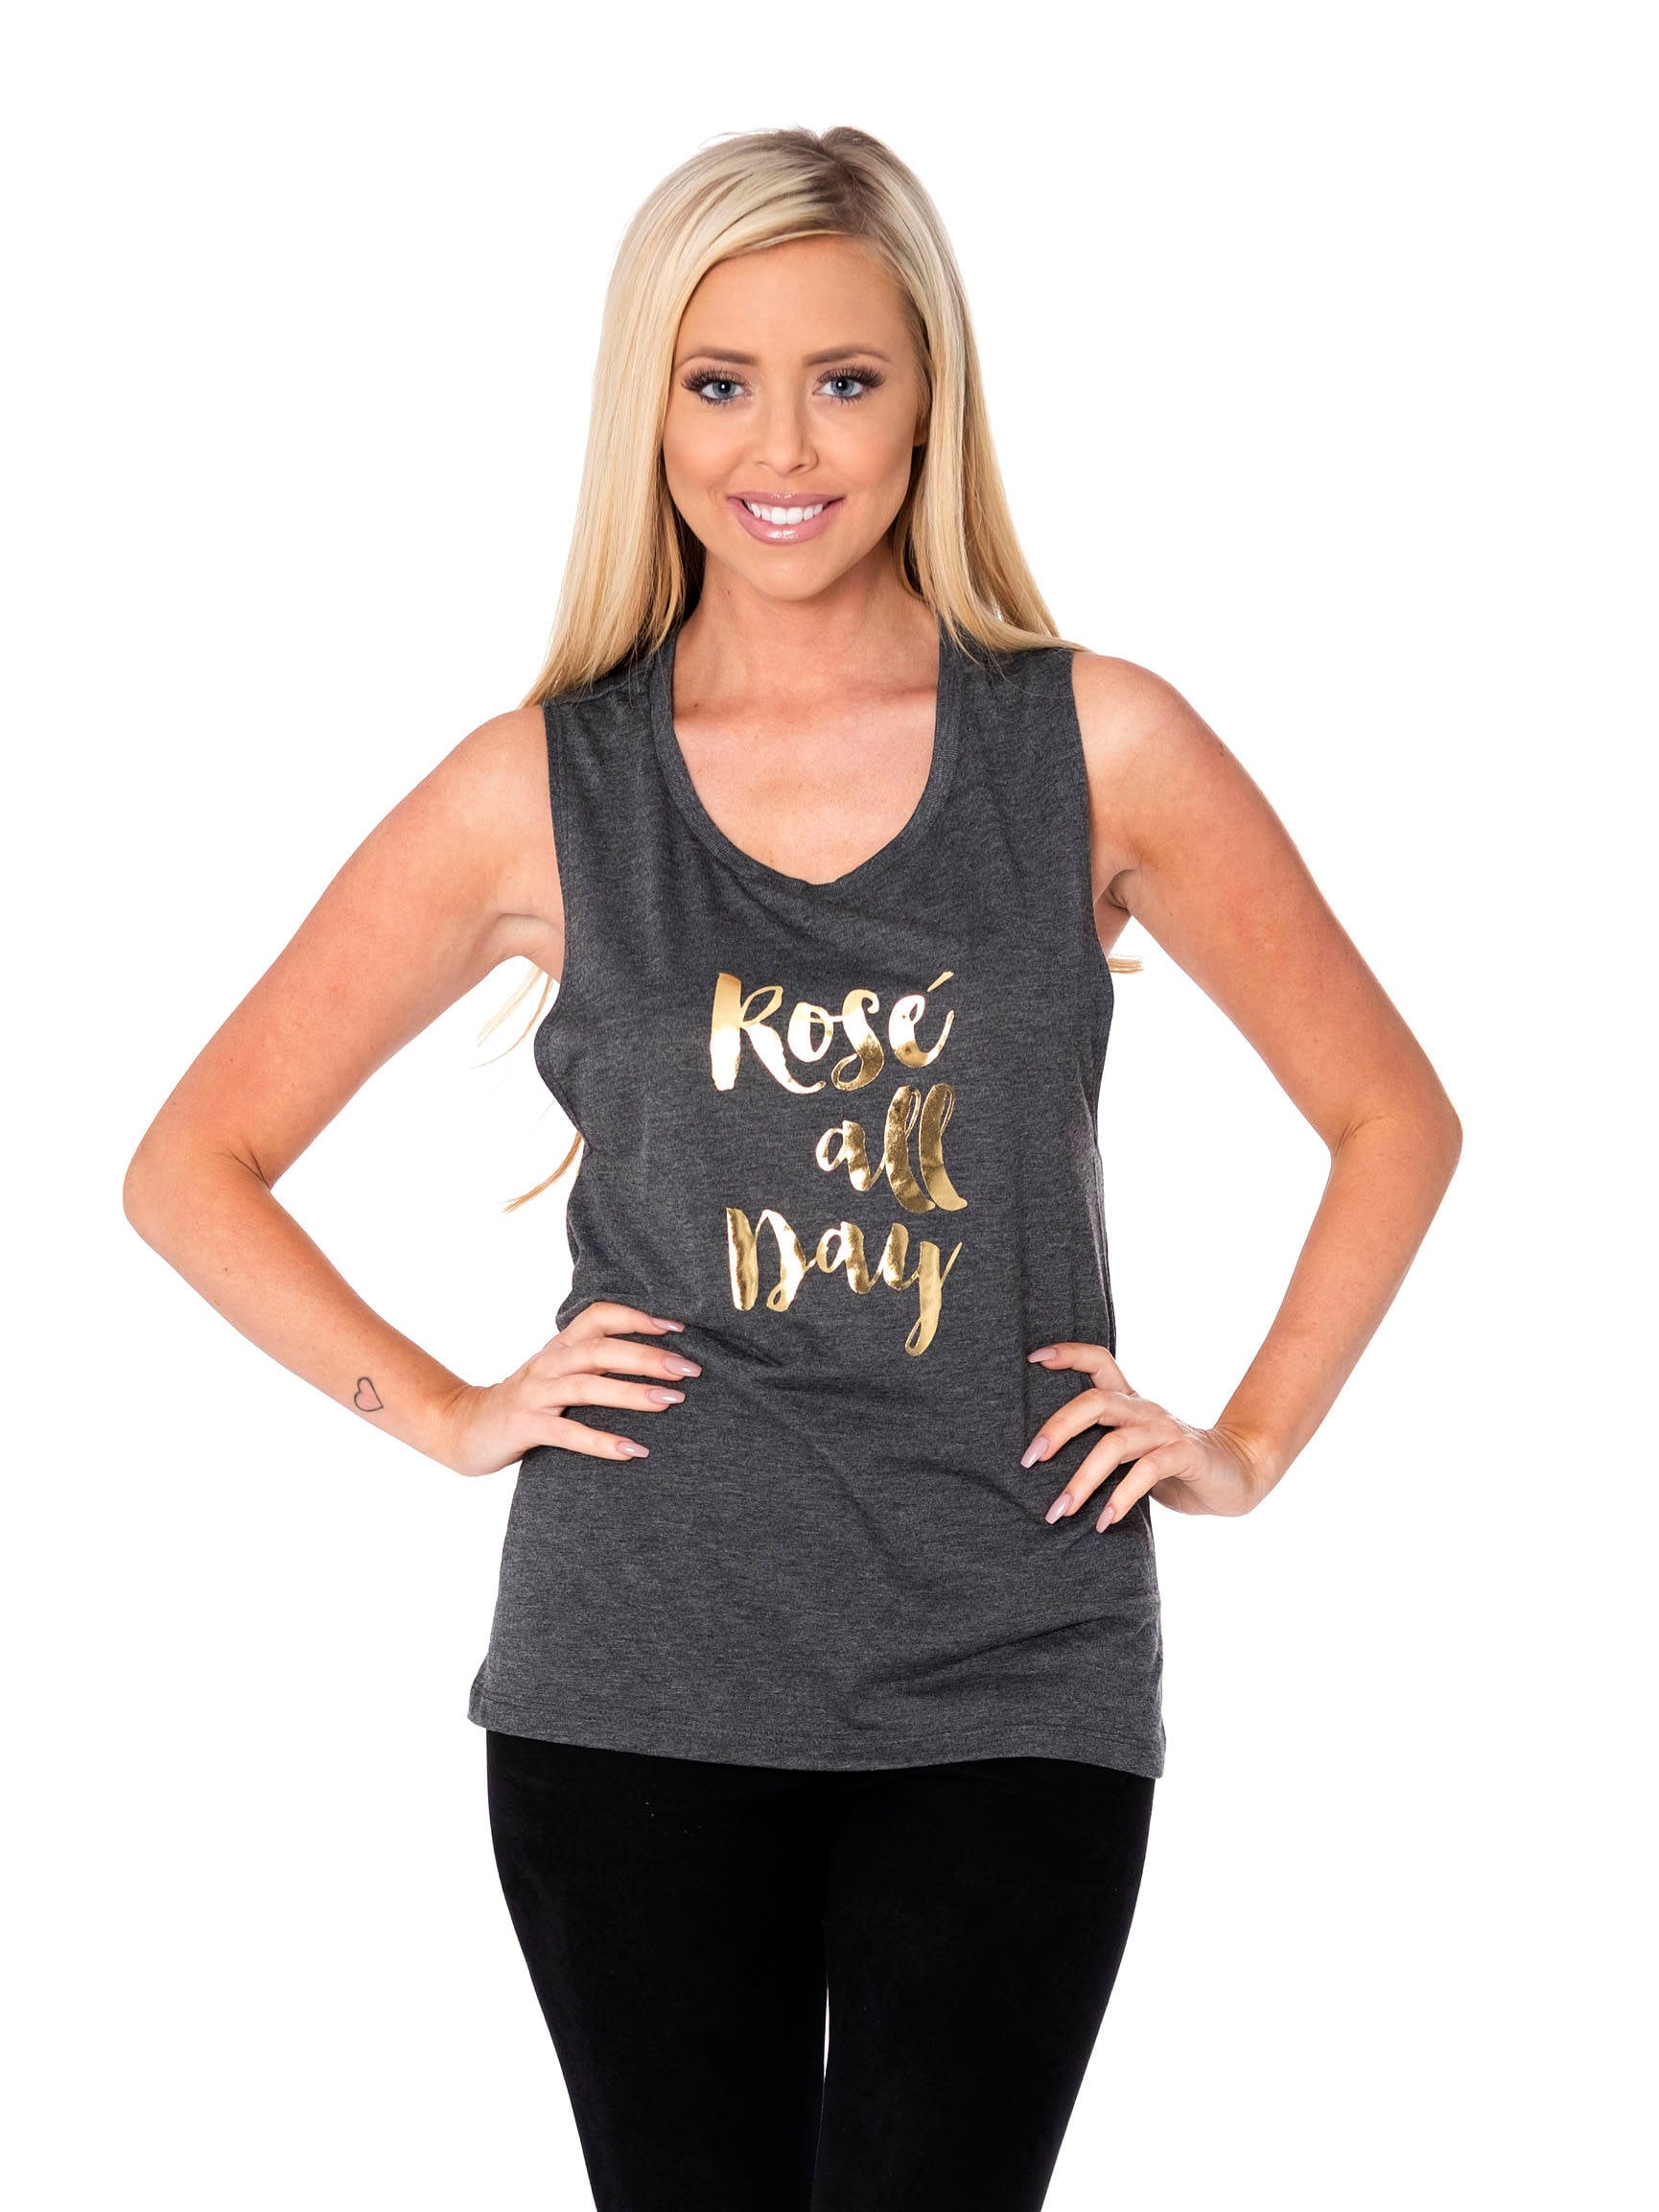 Bachelorette Party, Rose all Day Flowy Muscle Tank // Bachelorette Party Tank Tops for the Bachelorette, Bridesmaids, Maid of Honor / 8803